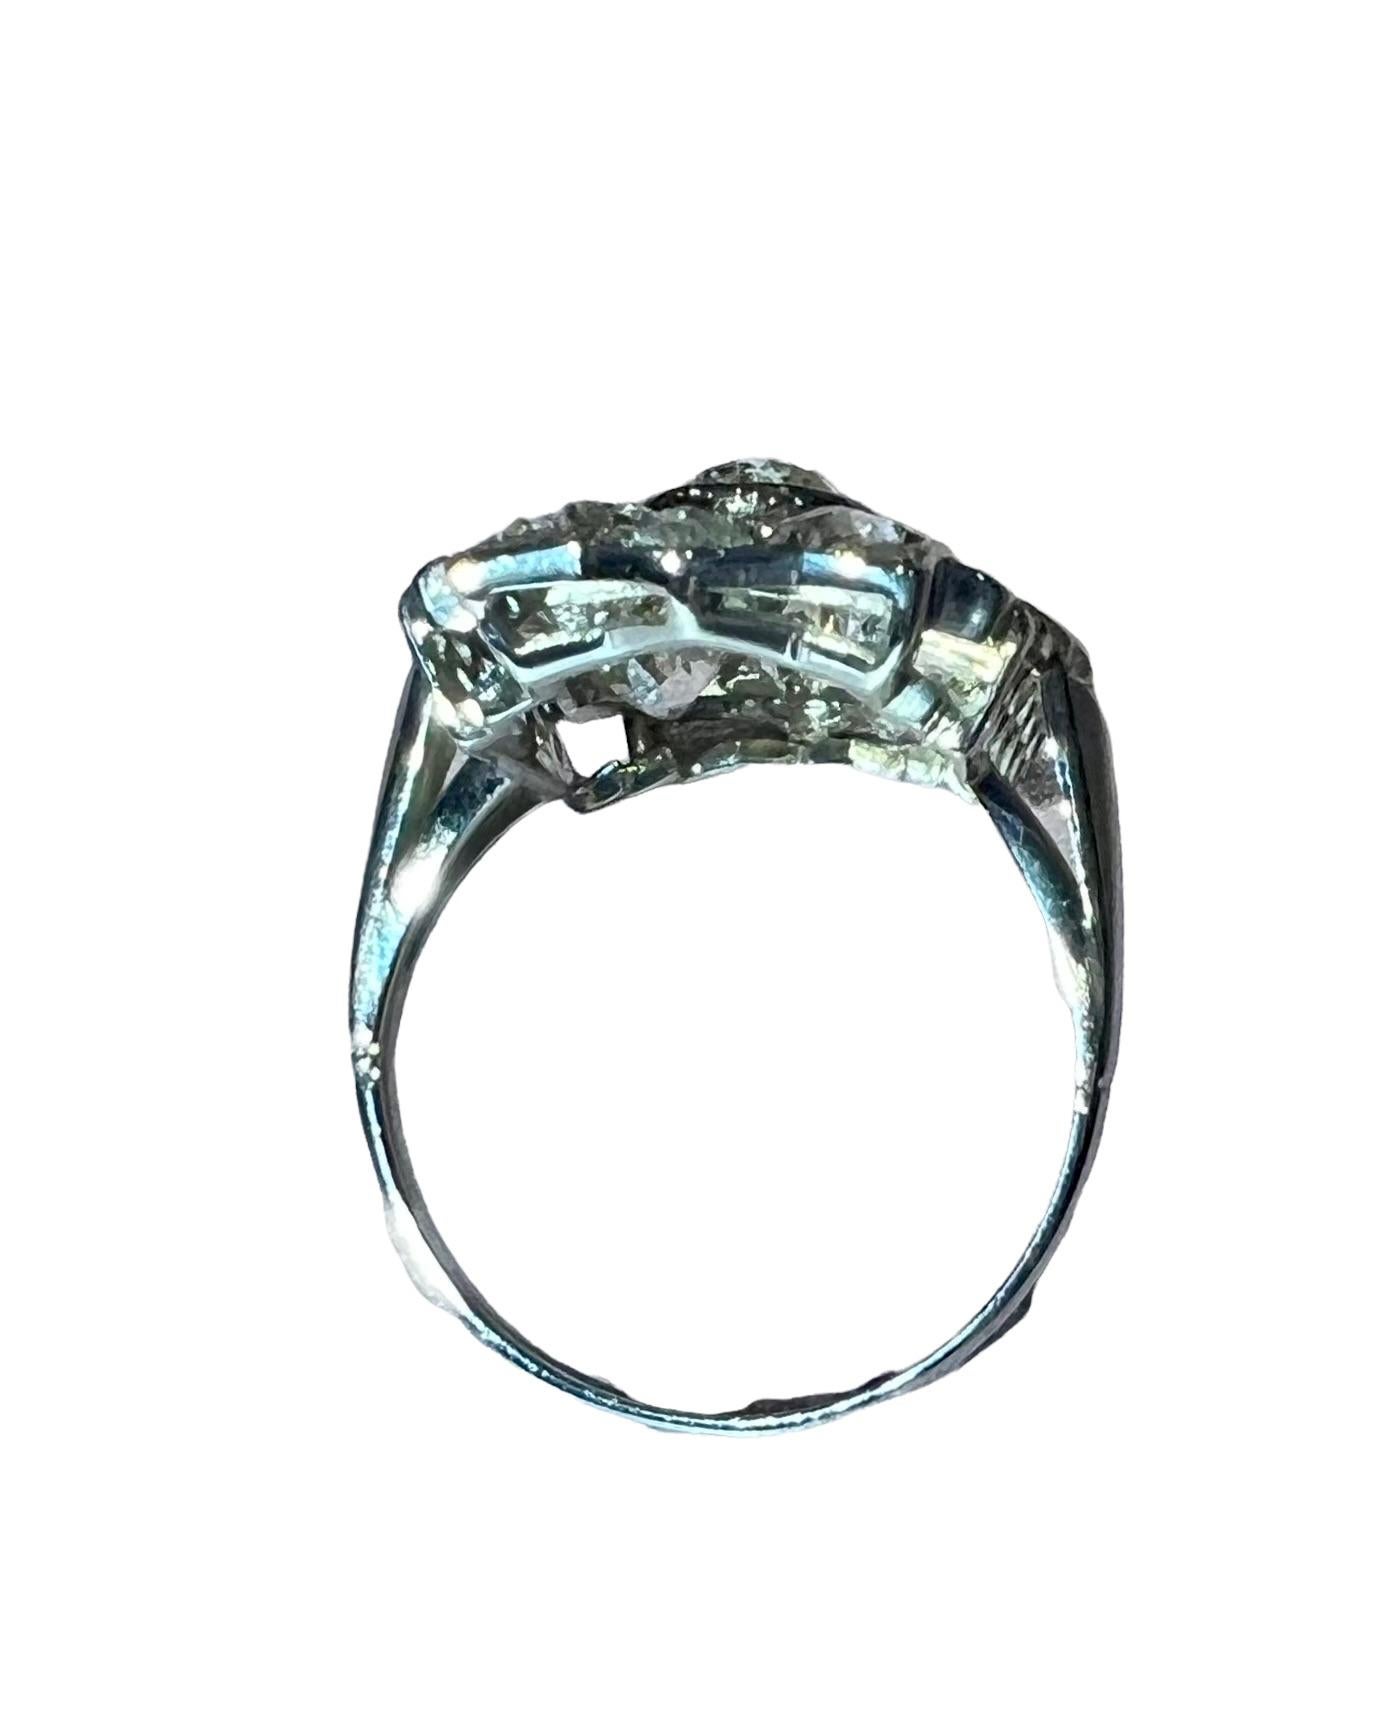  Art Deco , Platinum and 18ct Gold , Ring, Set with Old-Cut Diamonds, 1930 Period  4